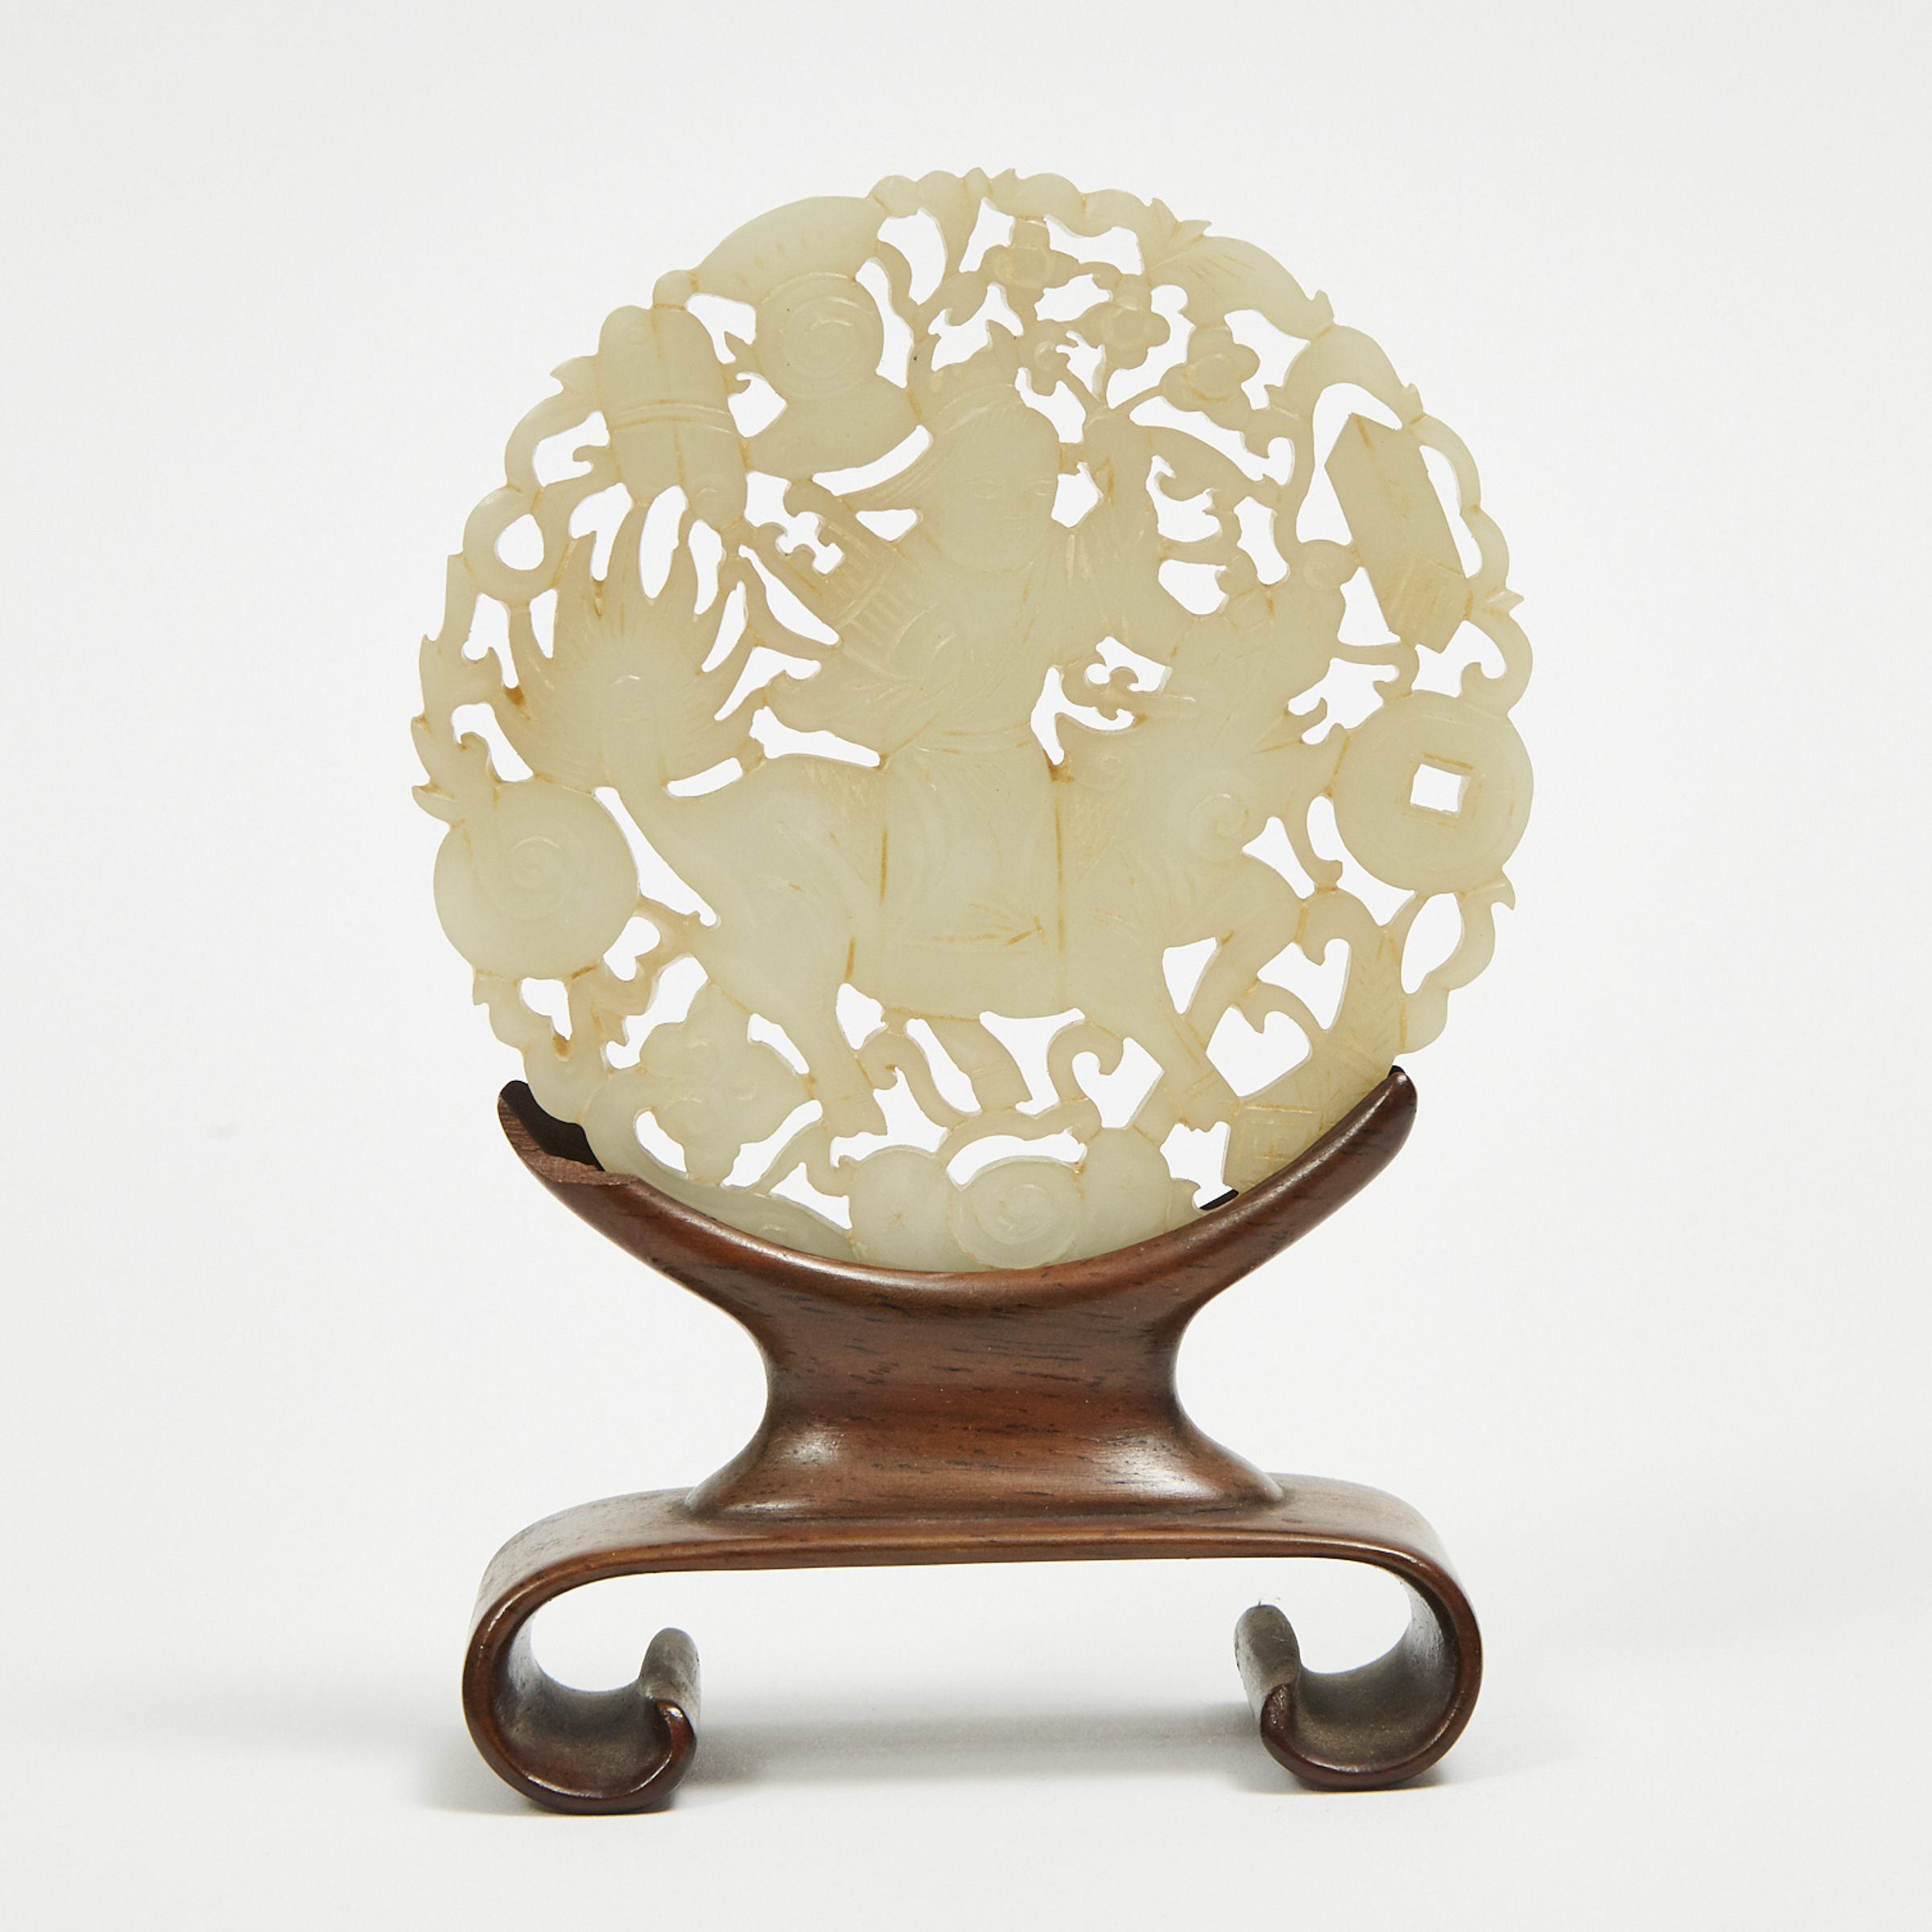 A Large Reticulated Jade Plaque with Stand